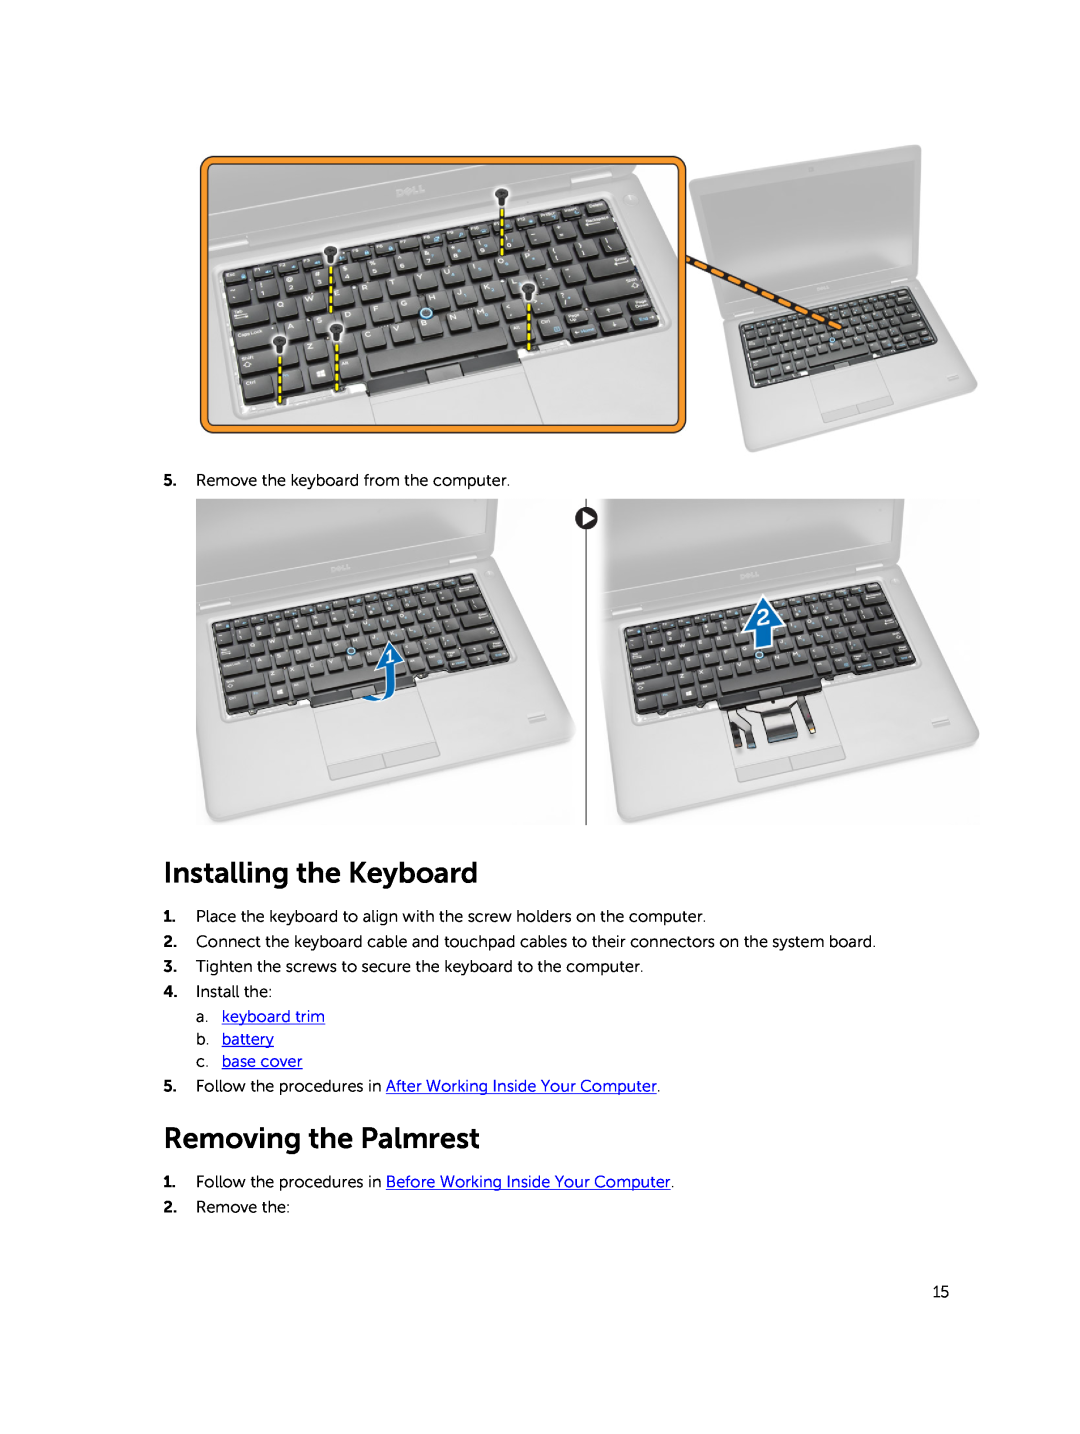 Dell E5450 owner manual Installing the Keyboard, Removing the Palmrest 